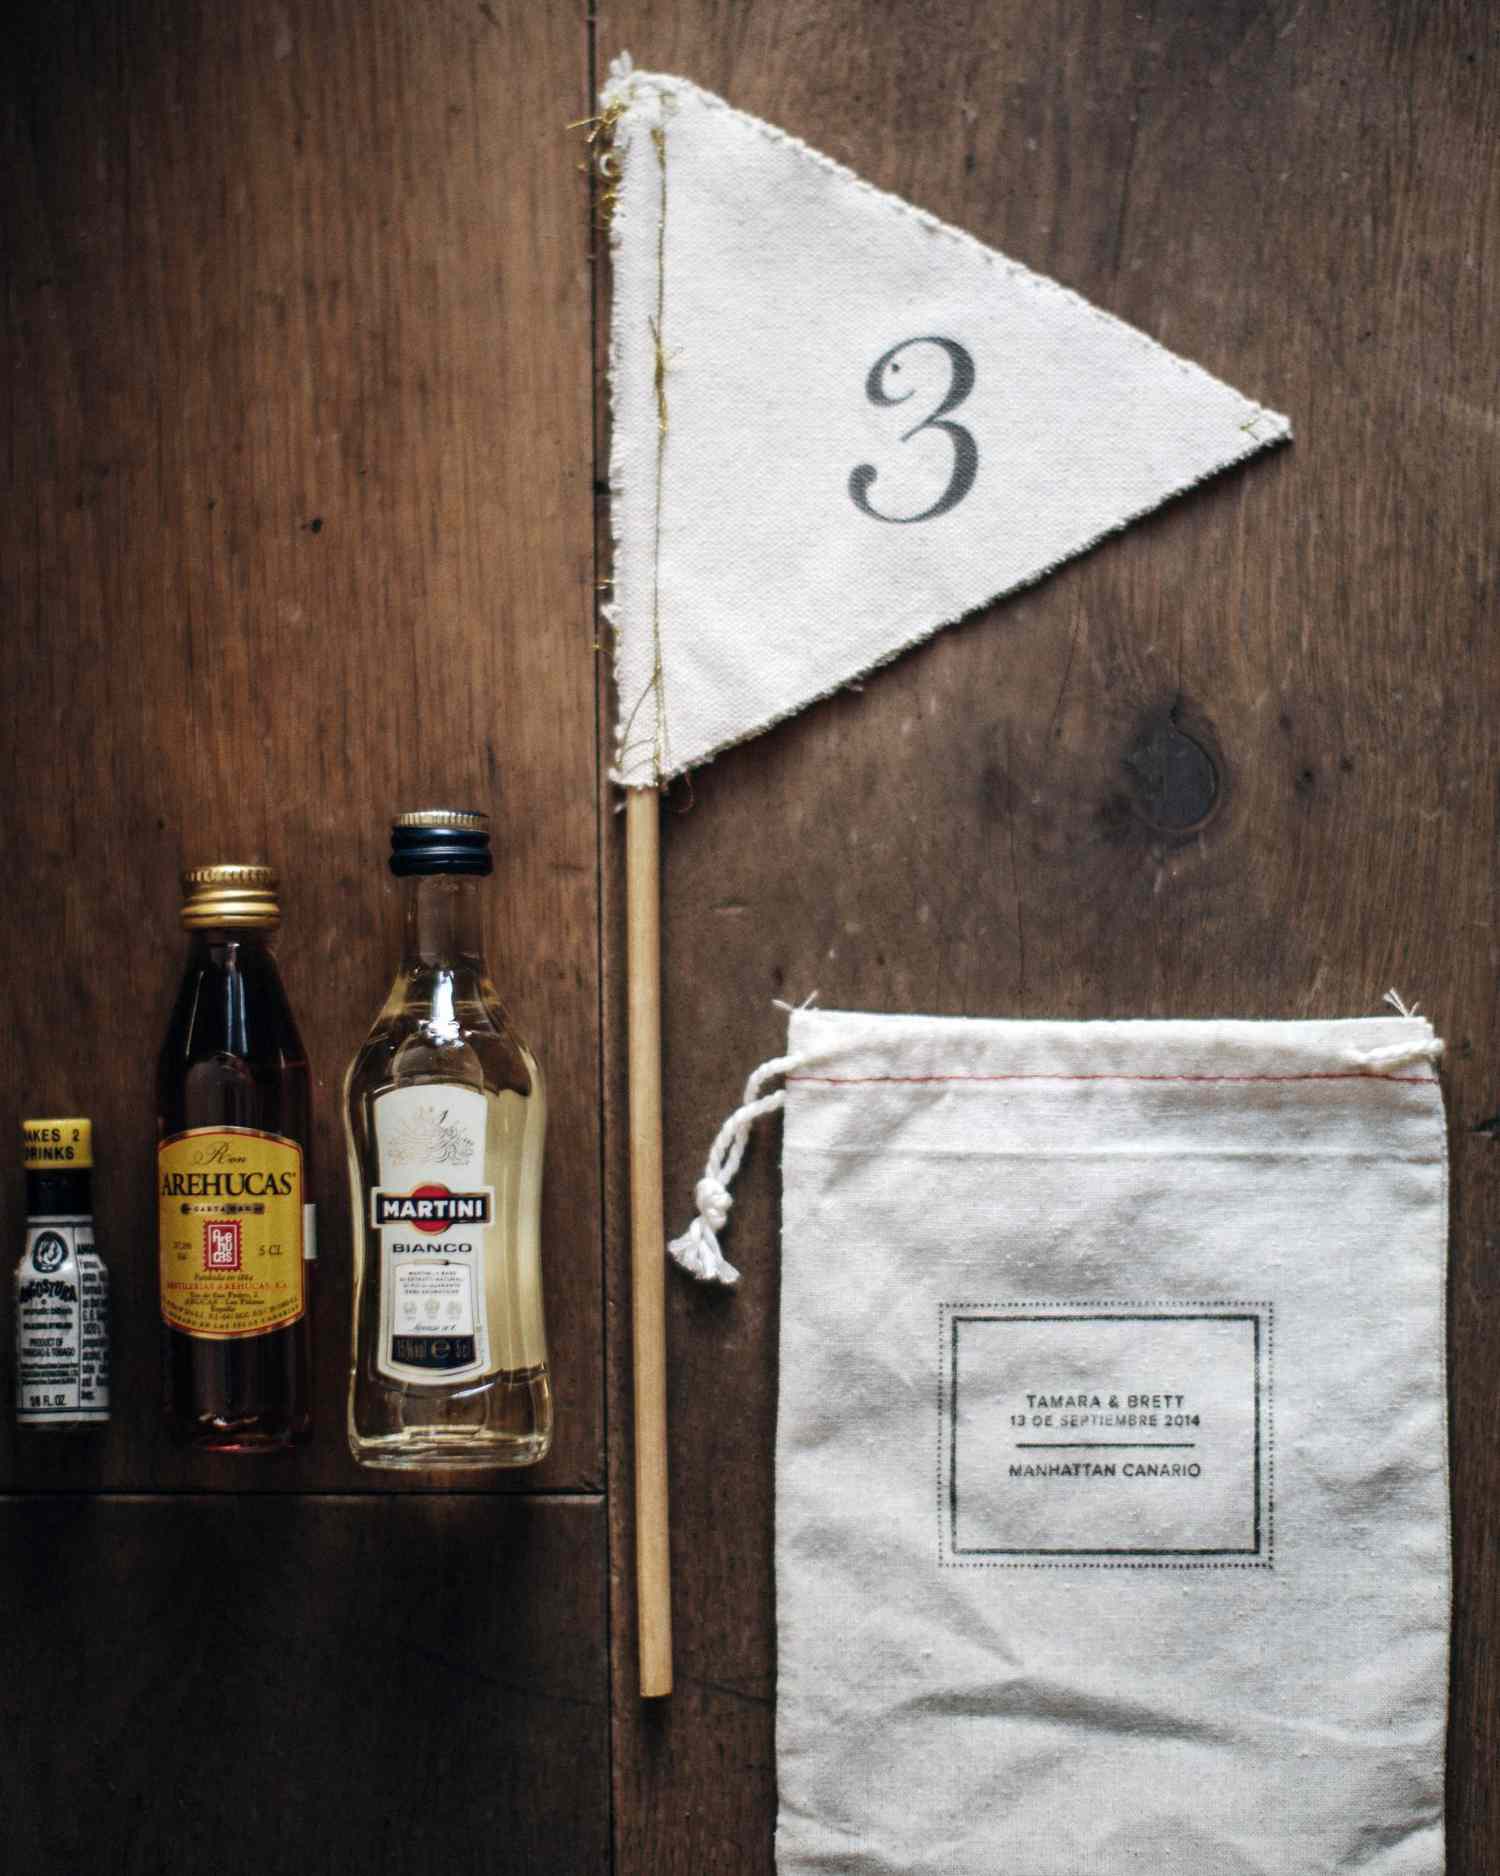 <p>Guests at this wedding in the Canary Islands received muslin pouches filled with the ingredients for a "Canarian" Manhattan, which included Arehucas, a local rum, to replace the traditional bourbon. The Manhattan represented the couple's hometown of New York City as well as an ode to the groom's grandmother, who loved the cocktail.</p>
                            